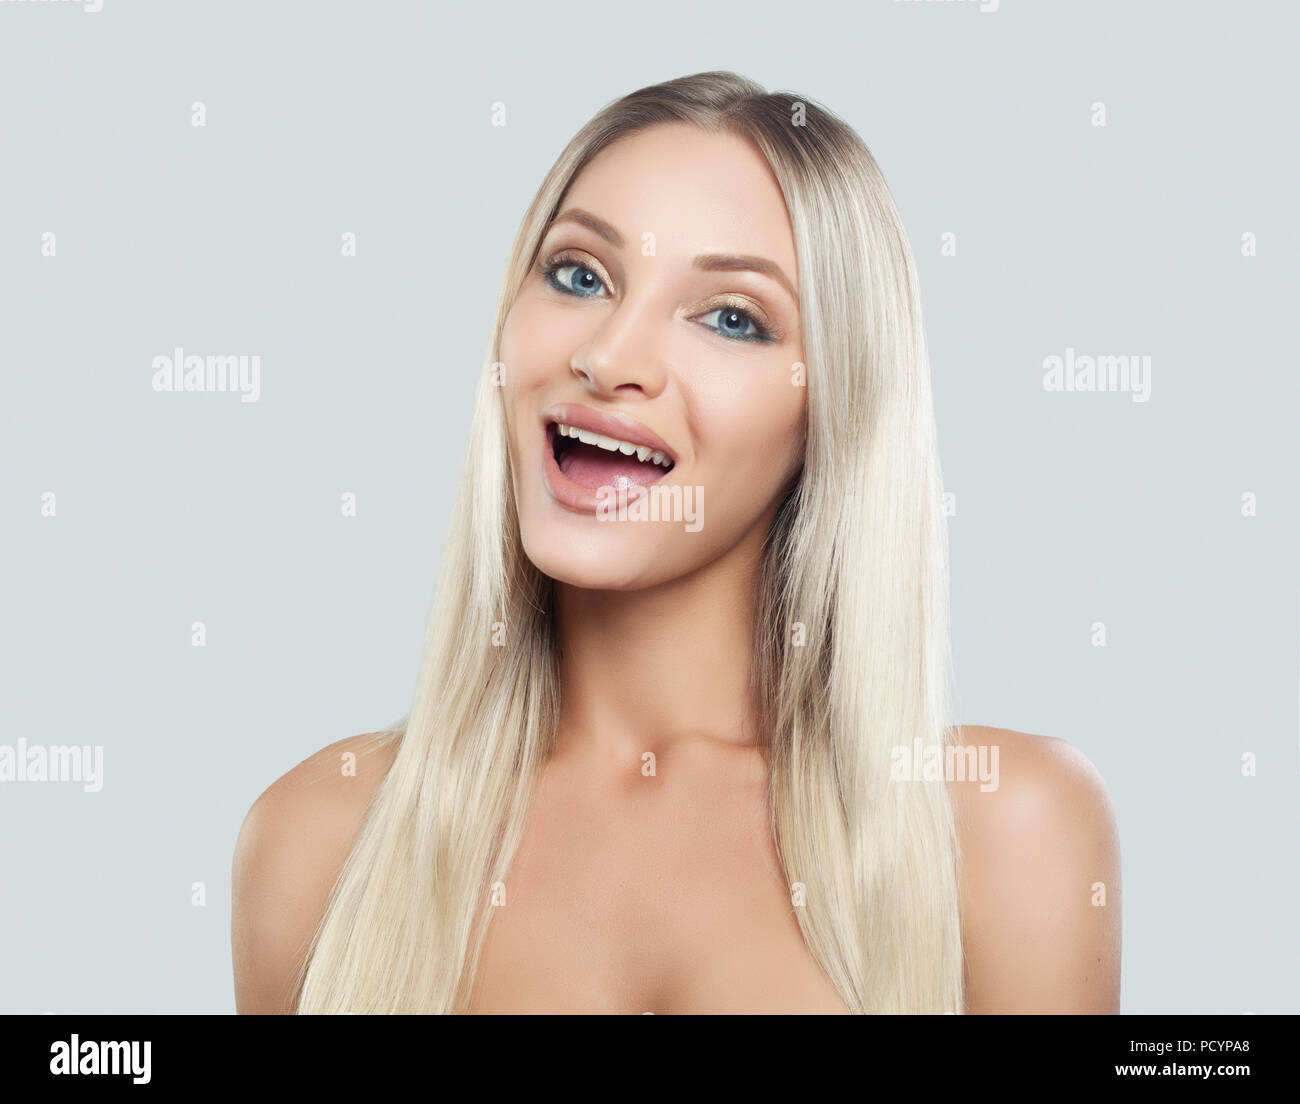 Beautiful Surprised Woman With Clean Fresh Skin Natural Makeup Blonde Hair And Opened Mouth On White Background Presenting Your Product Expressive Stock Photo Alamy